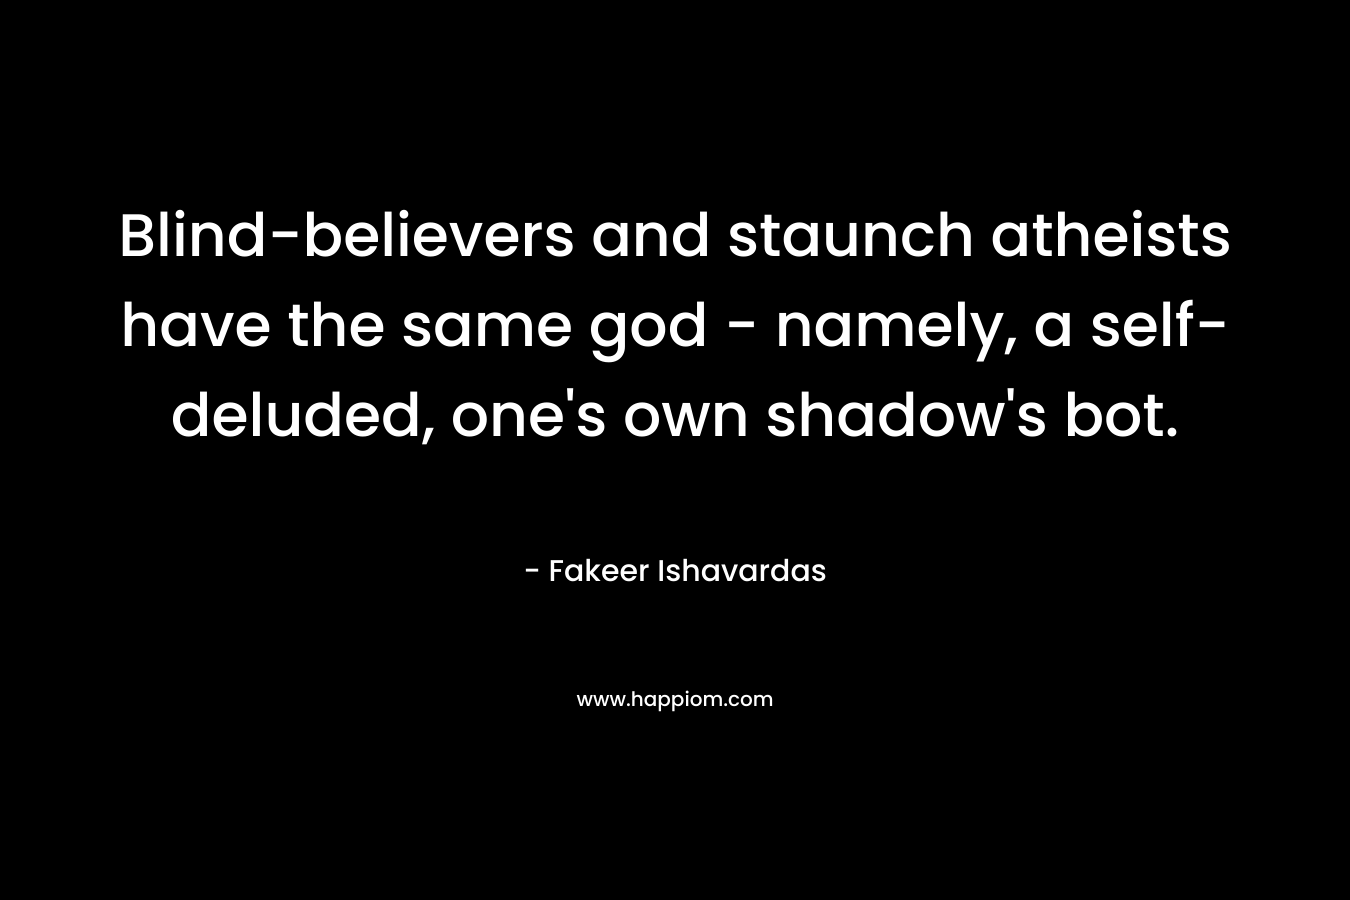 Blind-believers and staunch atheists have the same god – namely, a self-deluded, one’s own shadow’s bot. – Fakeer Ishavardas